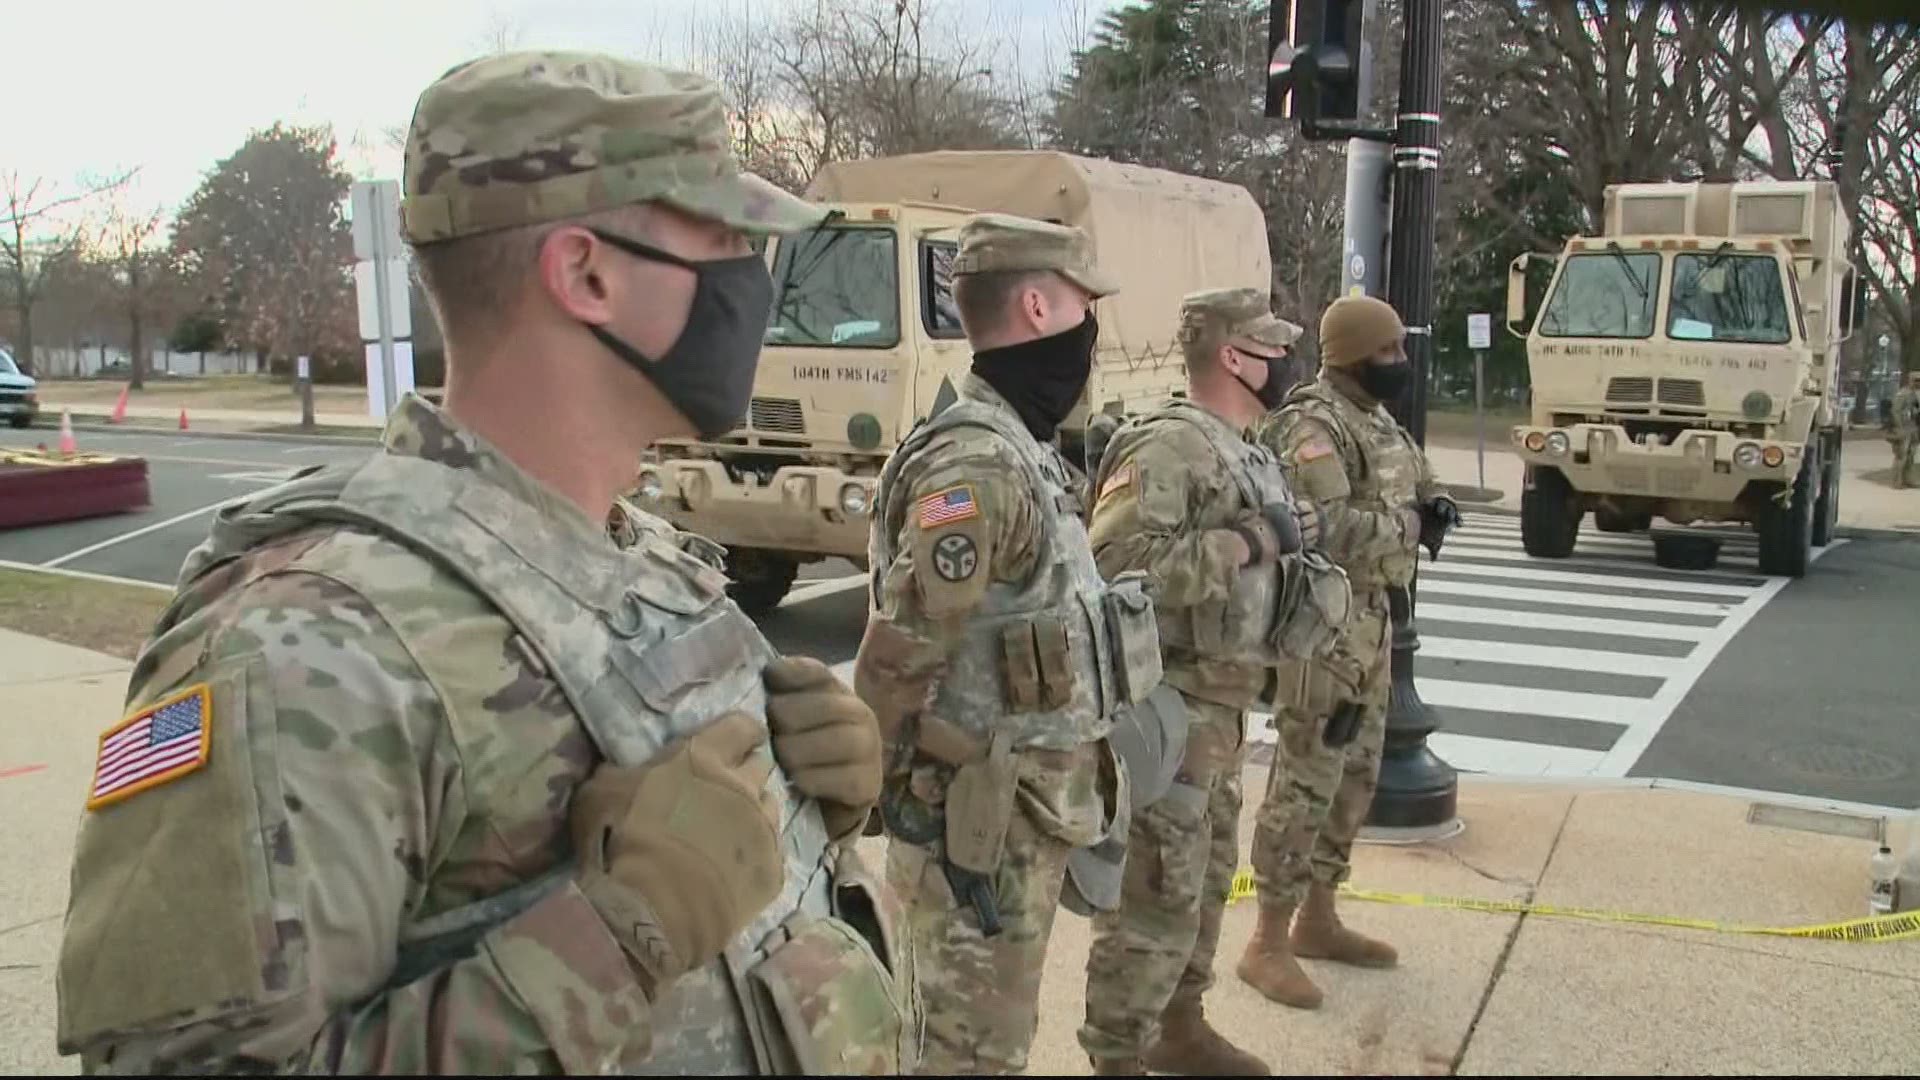 Now that the Inauguration is over most of the members of the National Guard will go home. But 6,000 will remain in the nation's capitol for the next 30 days.